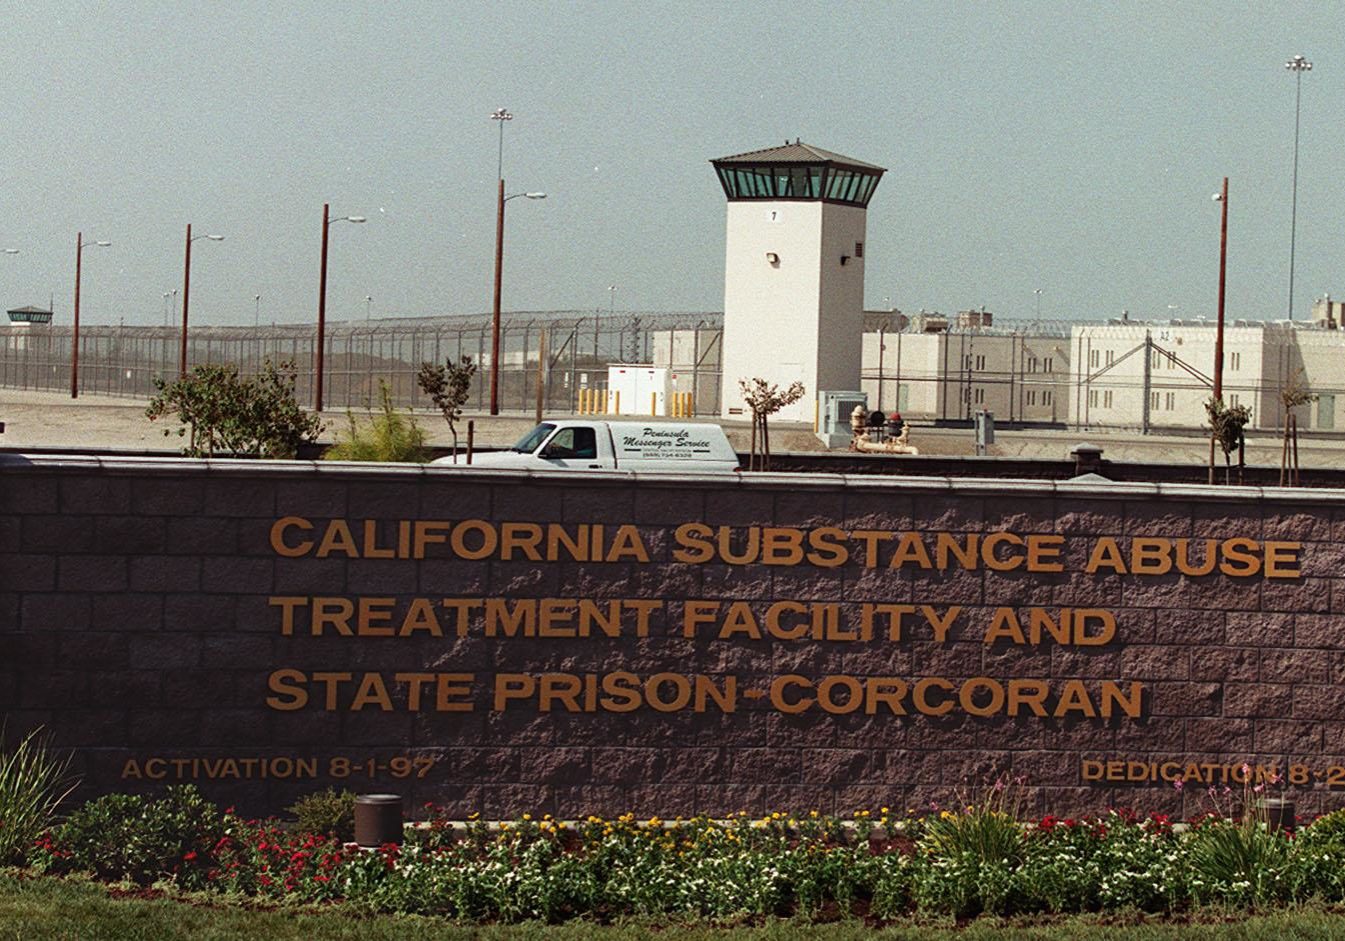 375011 02: Actor Robert Downey Jr. was released August 2, 2000 from this Correctional facility in Corcoran, Calif. Downey was housed at the California Substance Abuse Treatment Facility at Corcoran State Prison. (Photo by Online USA)